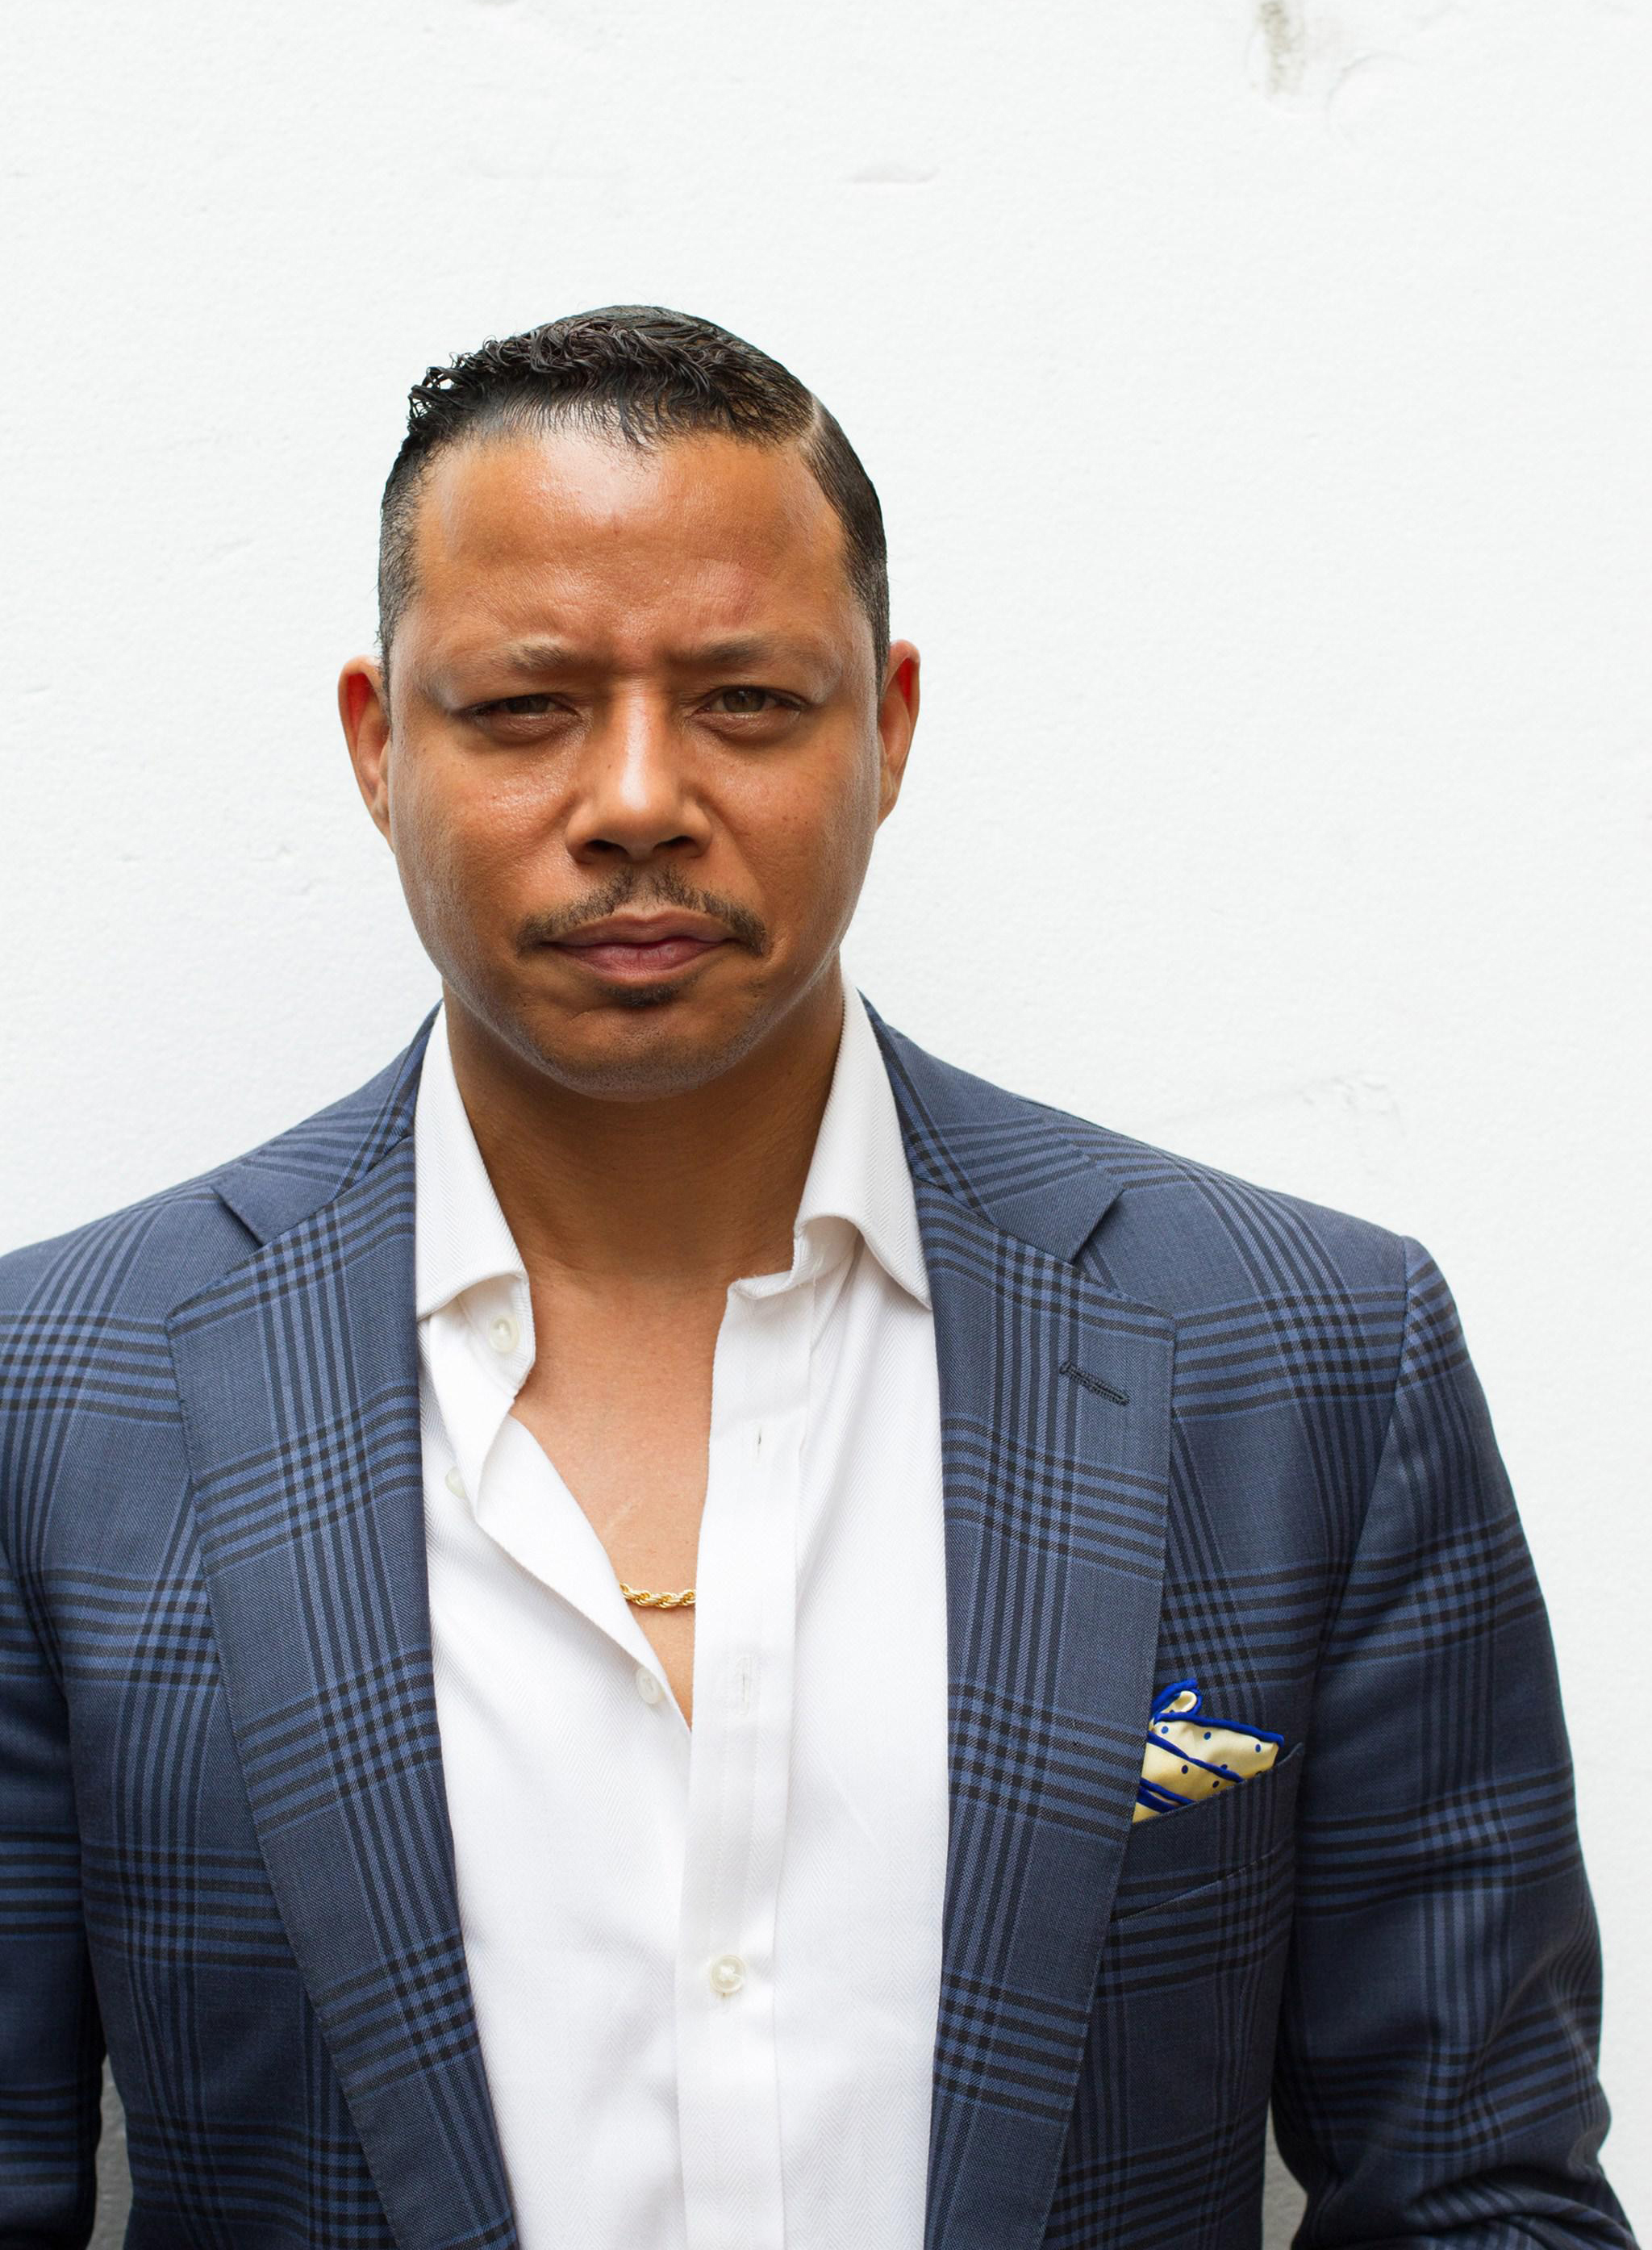 actor Terrence Howard sporting a pencil moustache